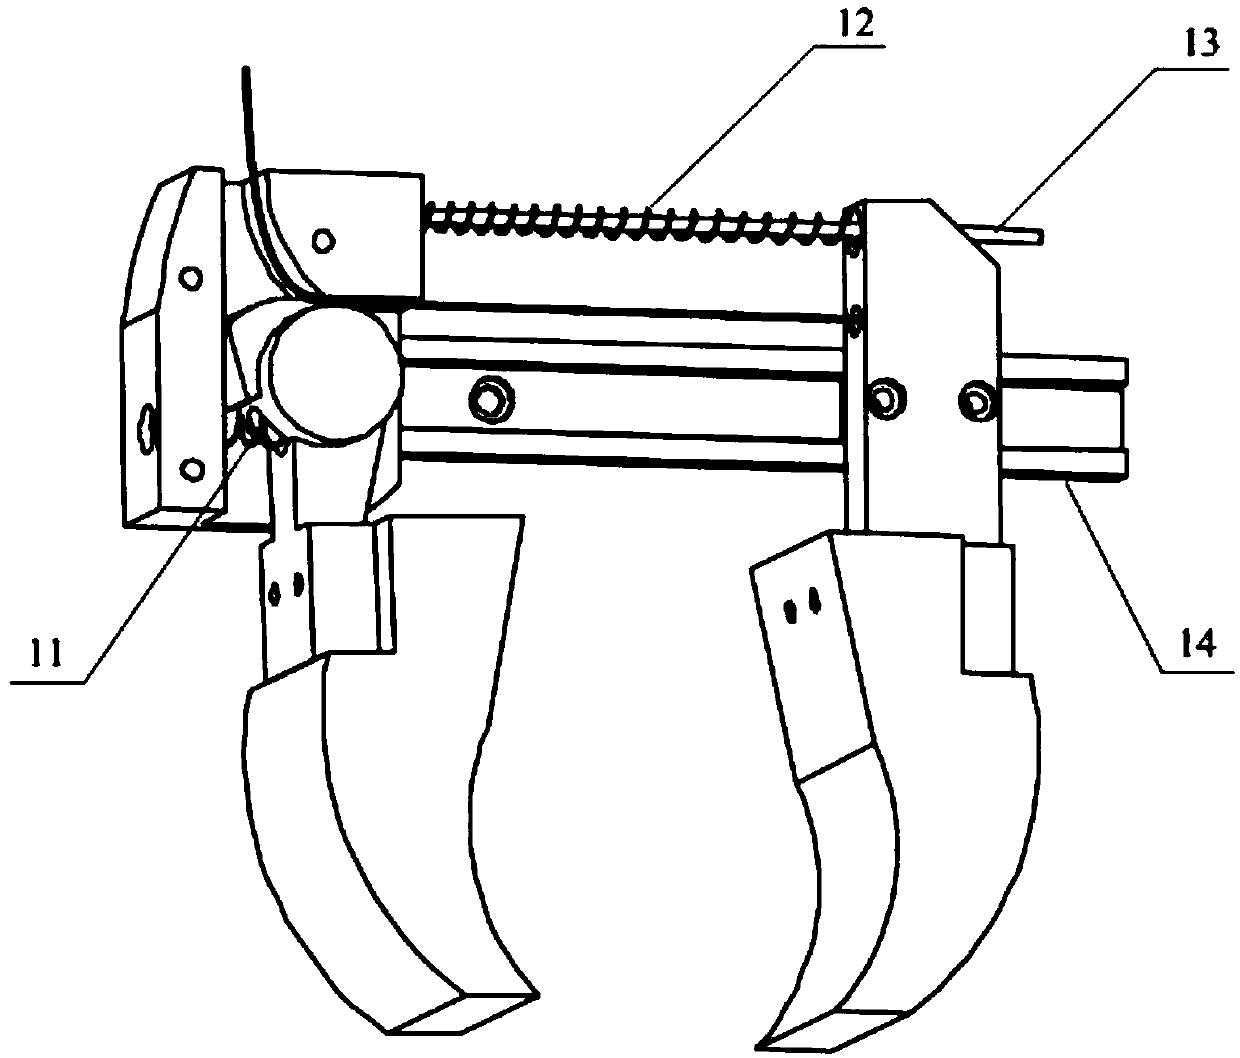 Lockable manipulator end executer device capable of realizing constant-force clamping